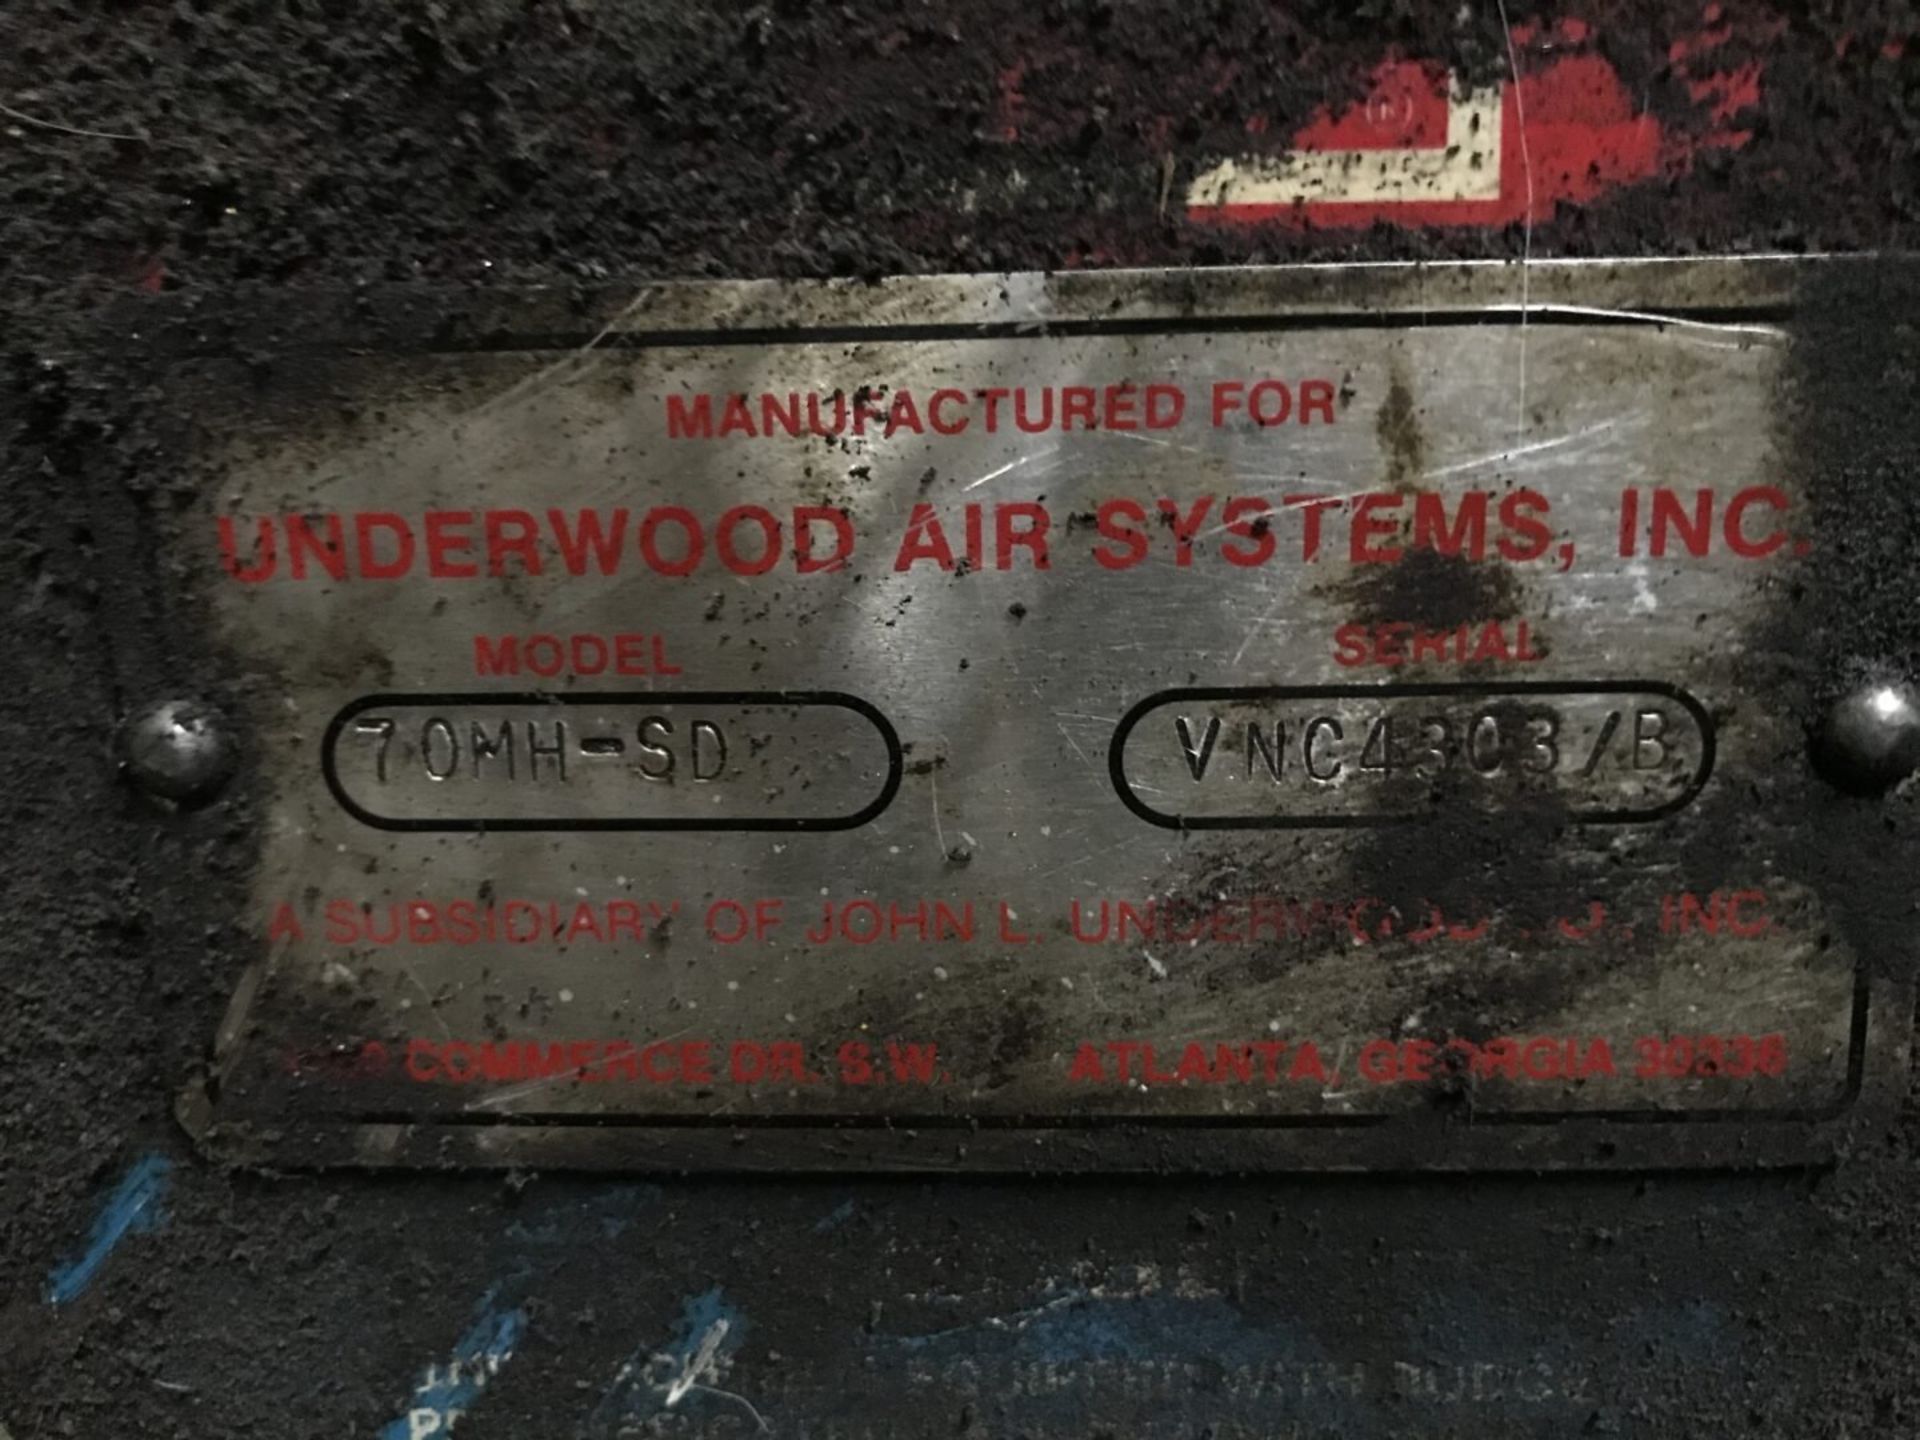 Lot of (6) Underwood Air Systems 70MH-SD Blowers - Image 16 of 19